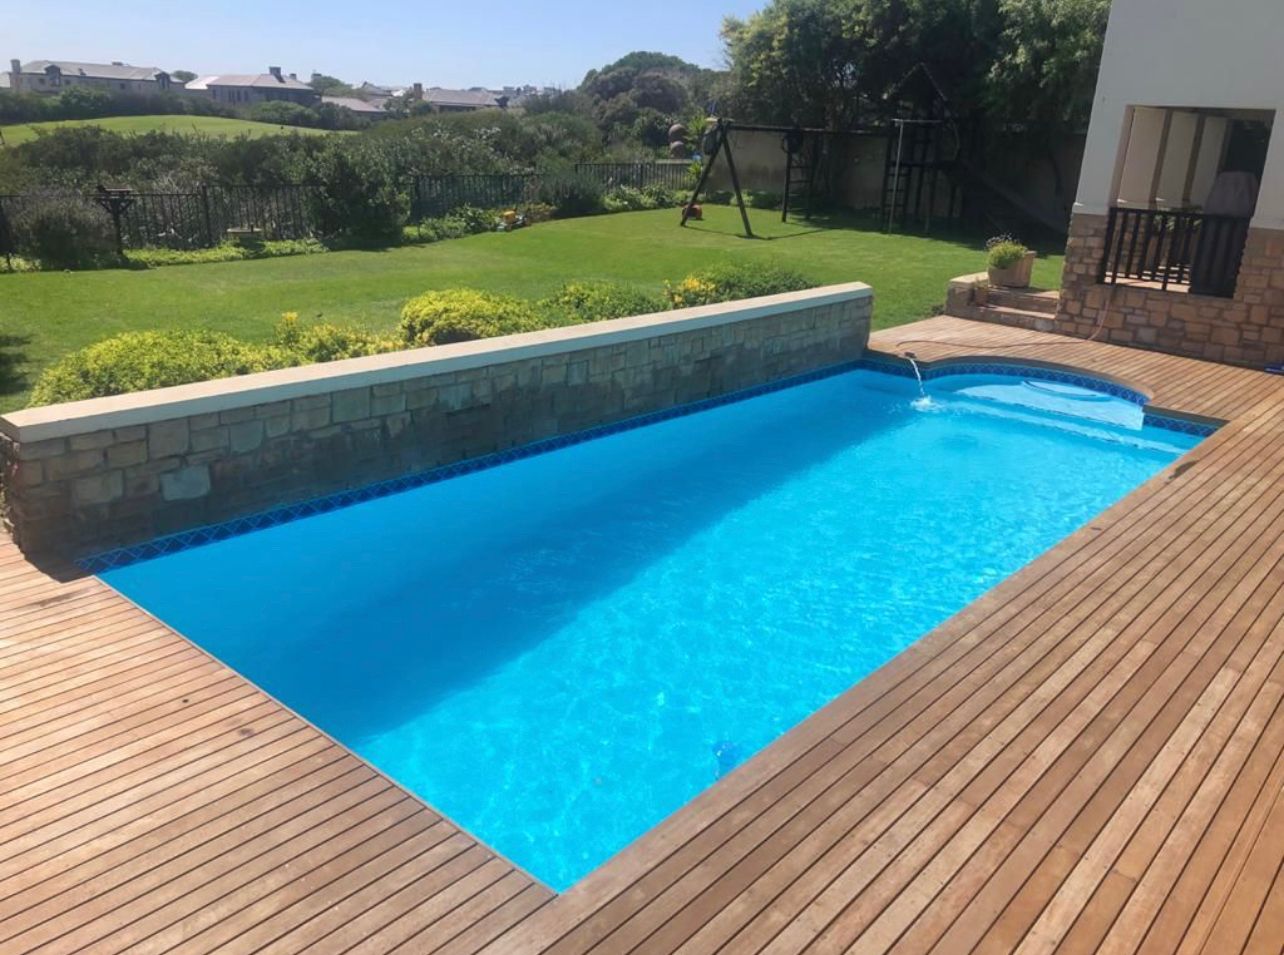  Pool decking Cape town